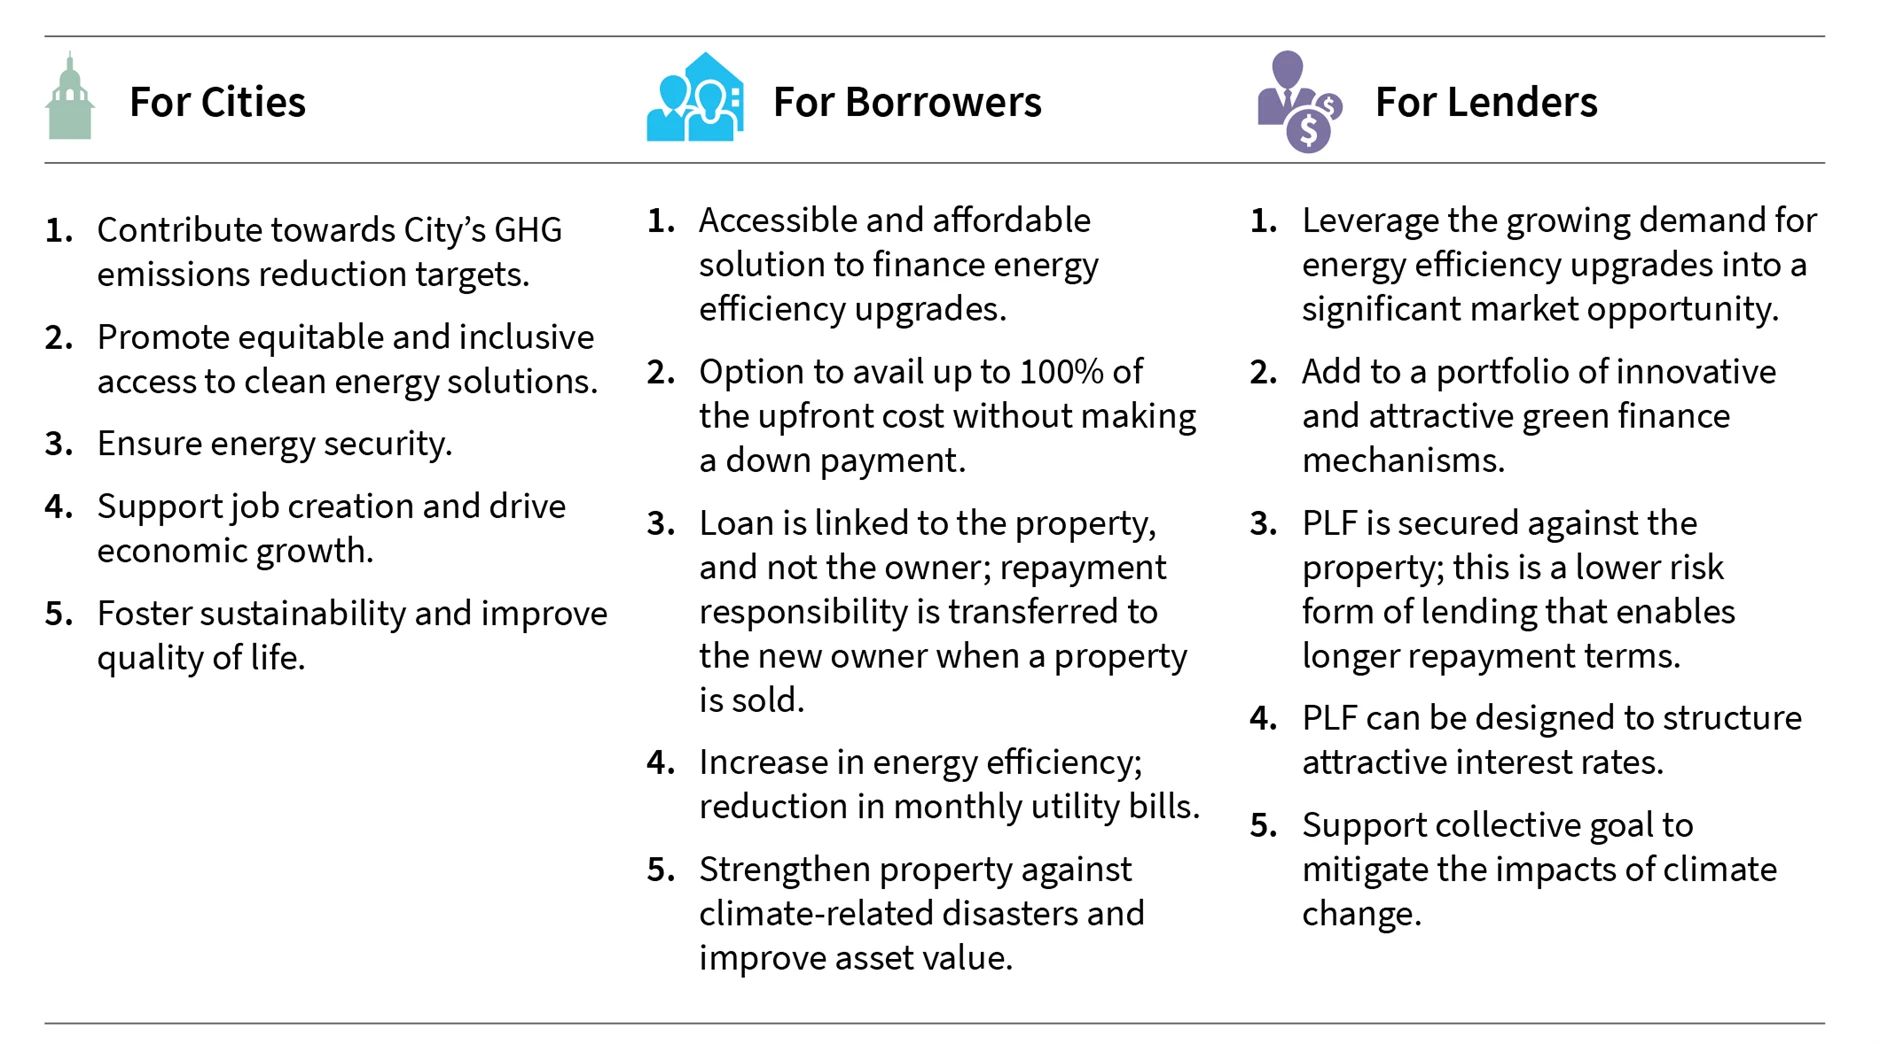 Table showing the benefits of financing building upgrades through PLF for cities, borrowers, and lenders.